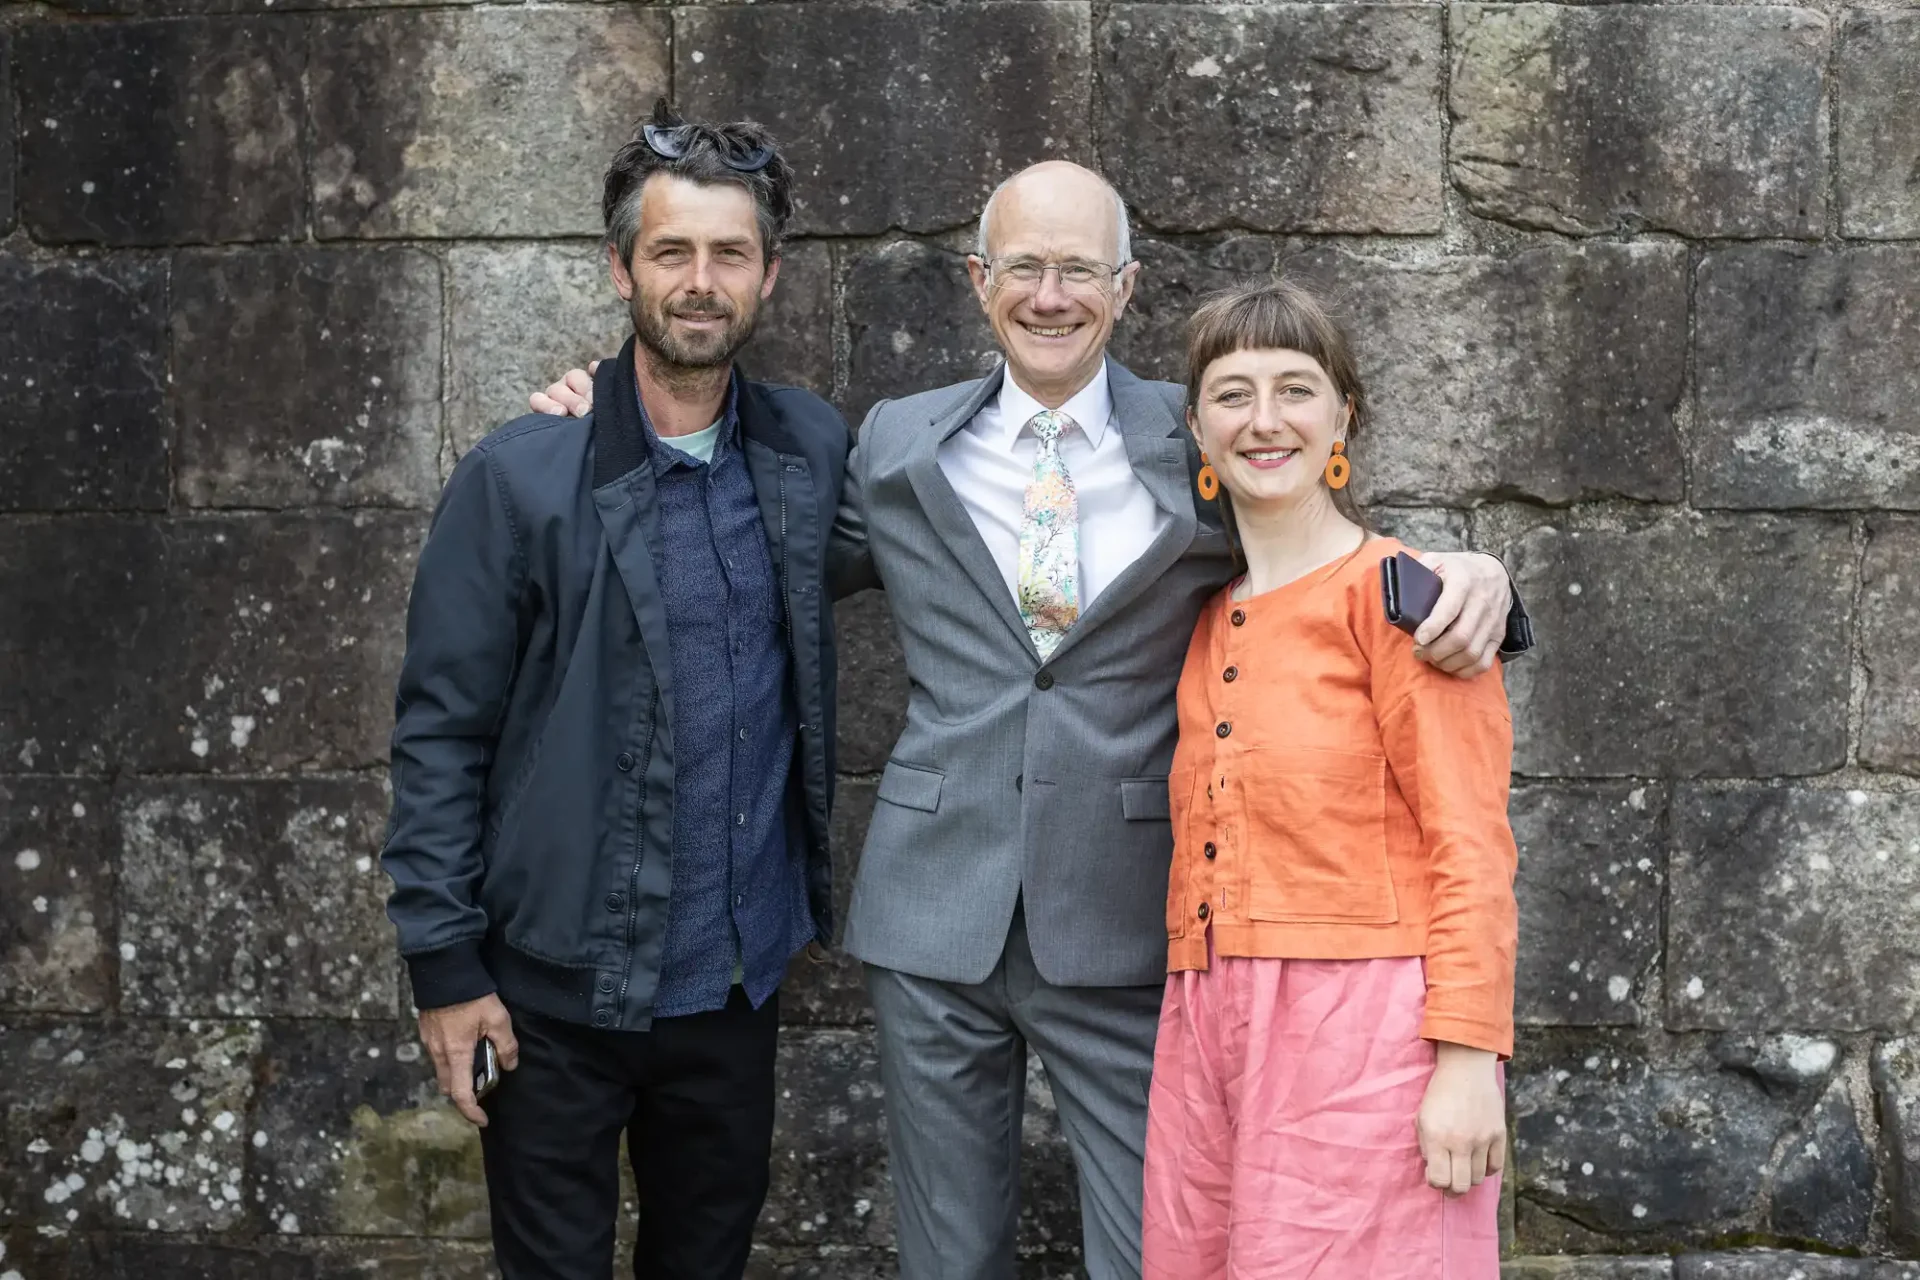 Three people standing in front of a stone wall; one man in a suit is in the center, with his arms around a man in a jacket on the left and a woman in an orange jacket and pink skirt on the right.